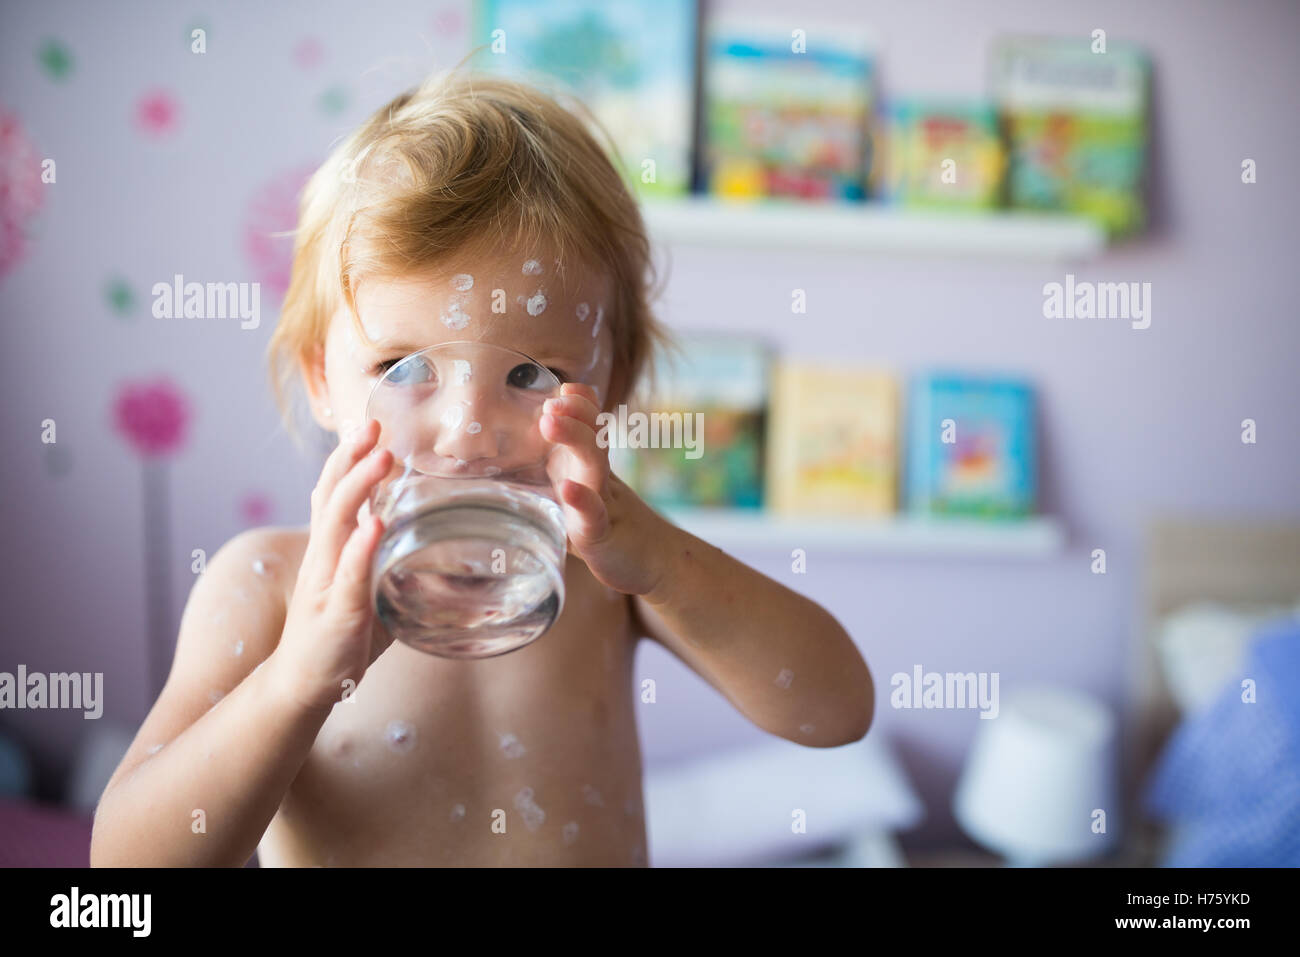 Little girl with chickenpox, drinking water from glass Stock Photo